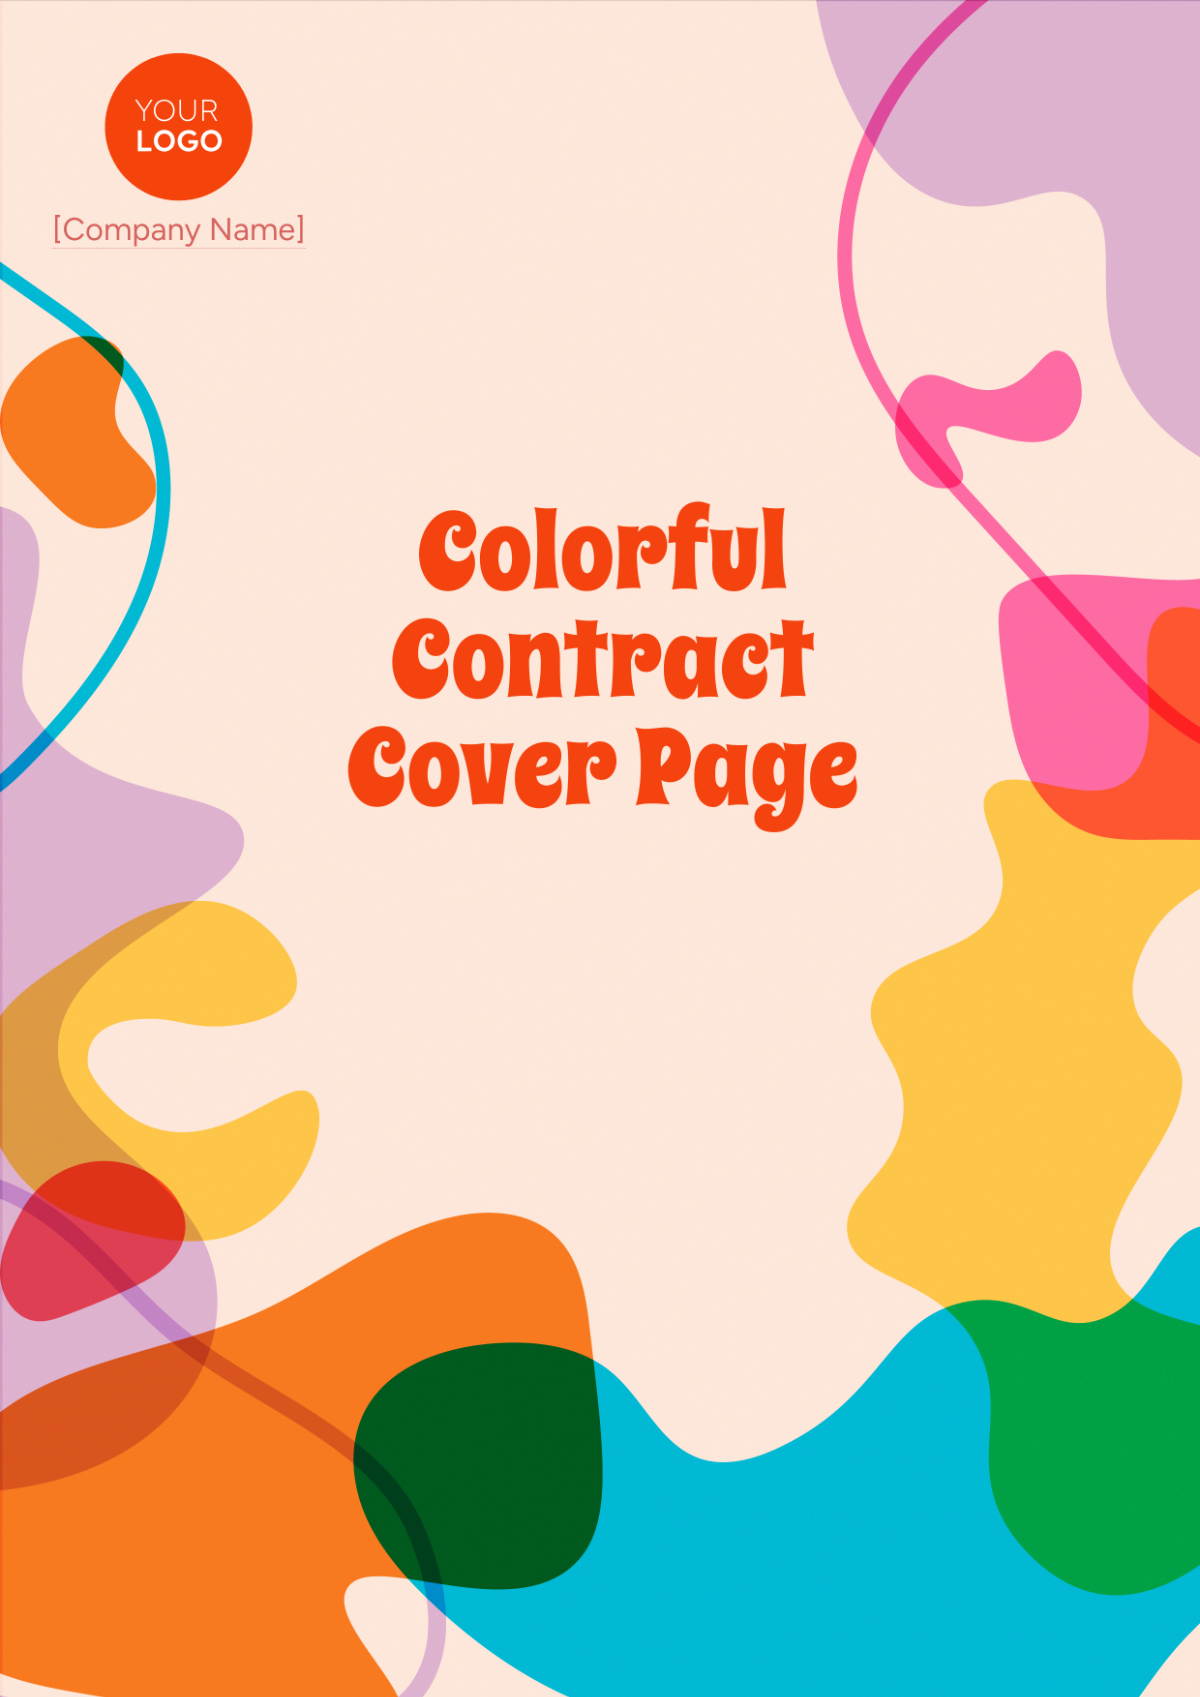 Colorful Contract Cover Page Template